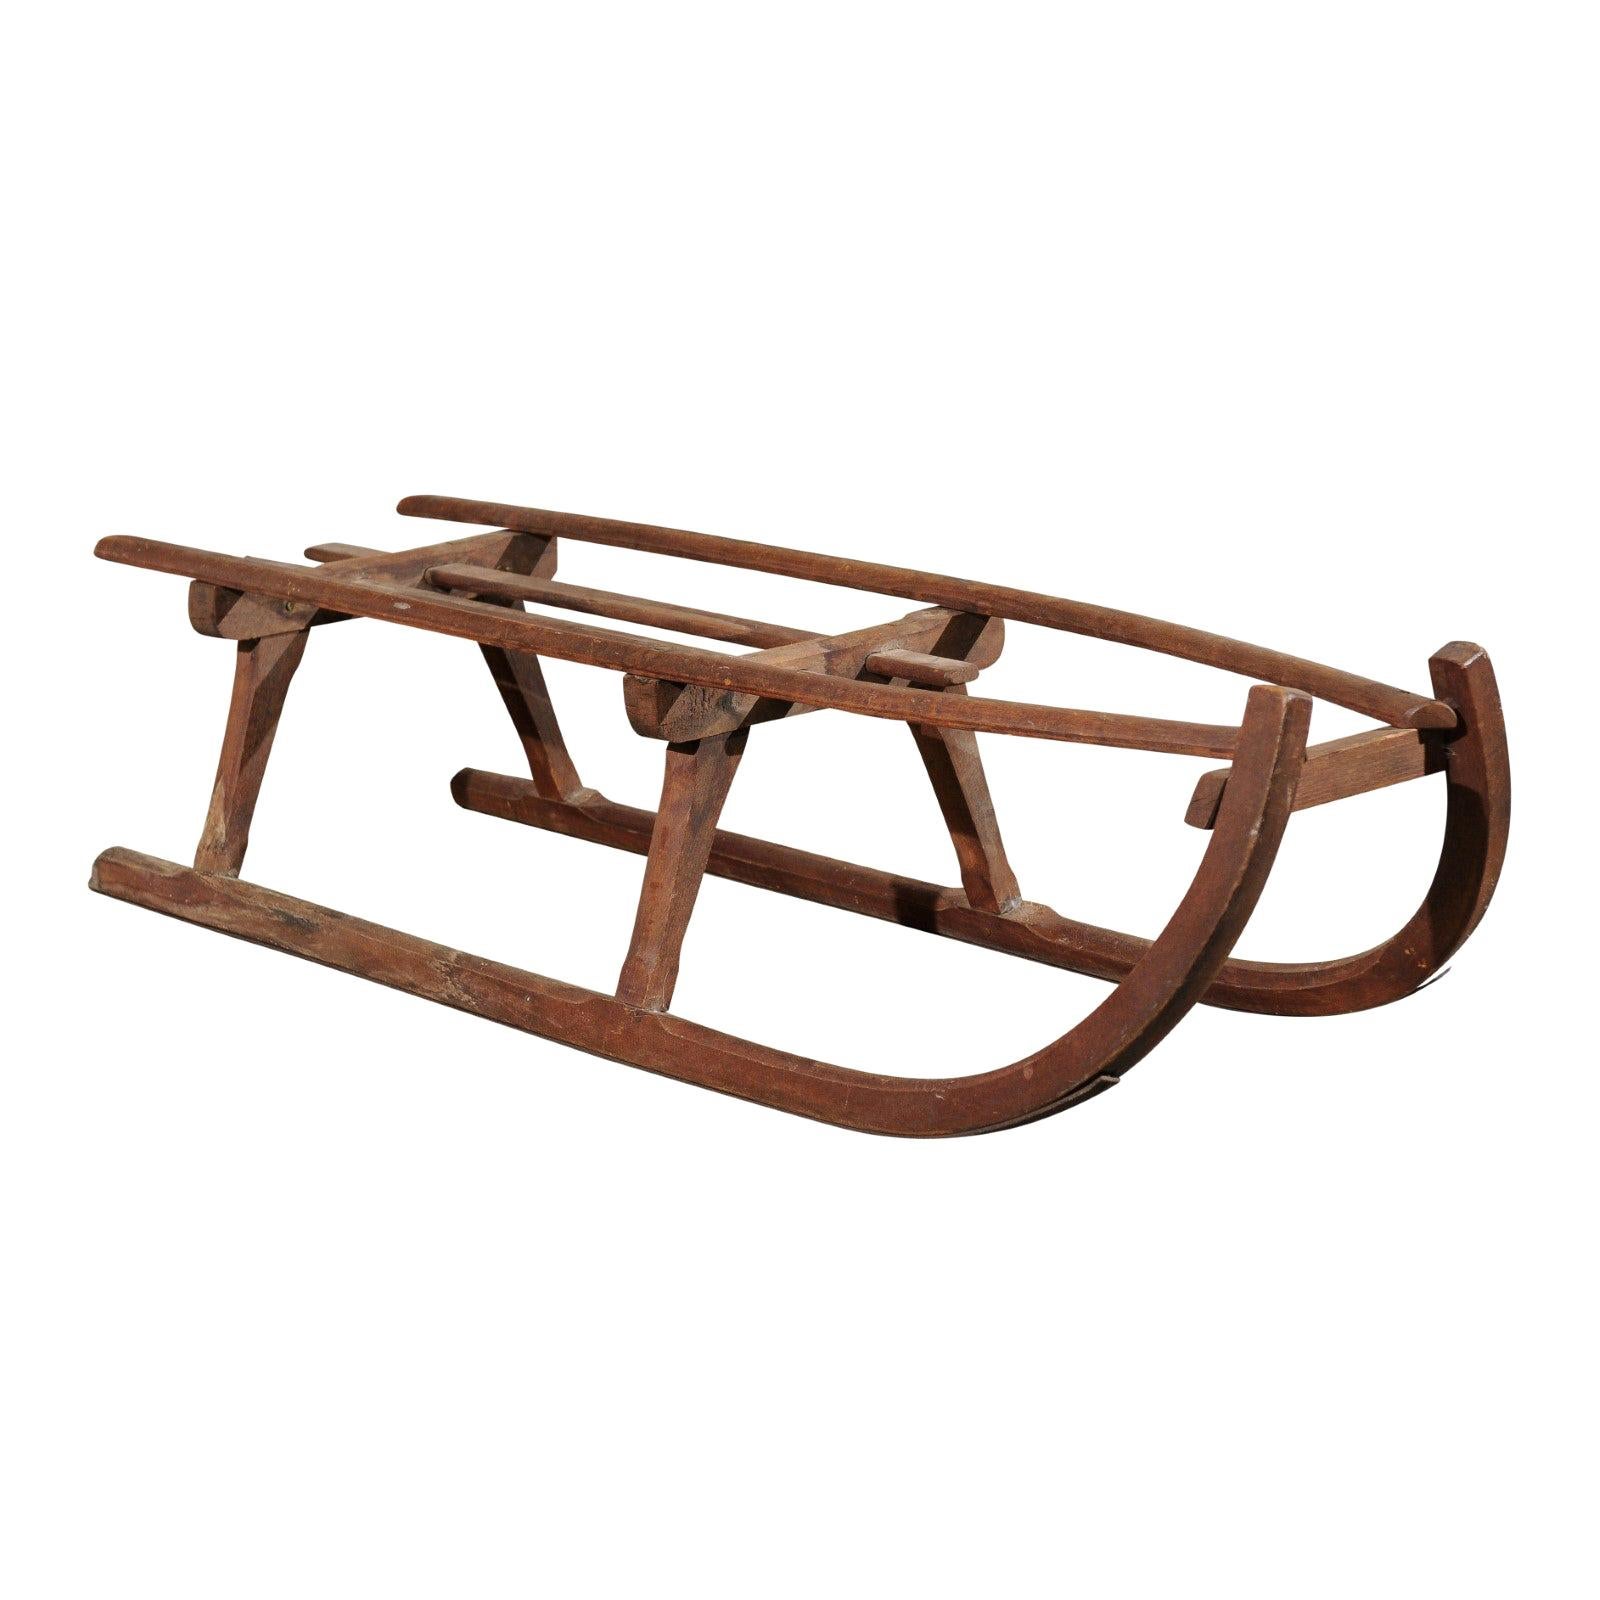 Rustic 19th Century French Wooden Sled with Weathered Patina and Curving Base